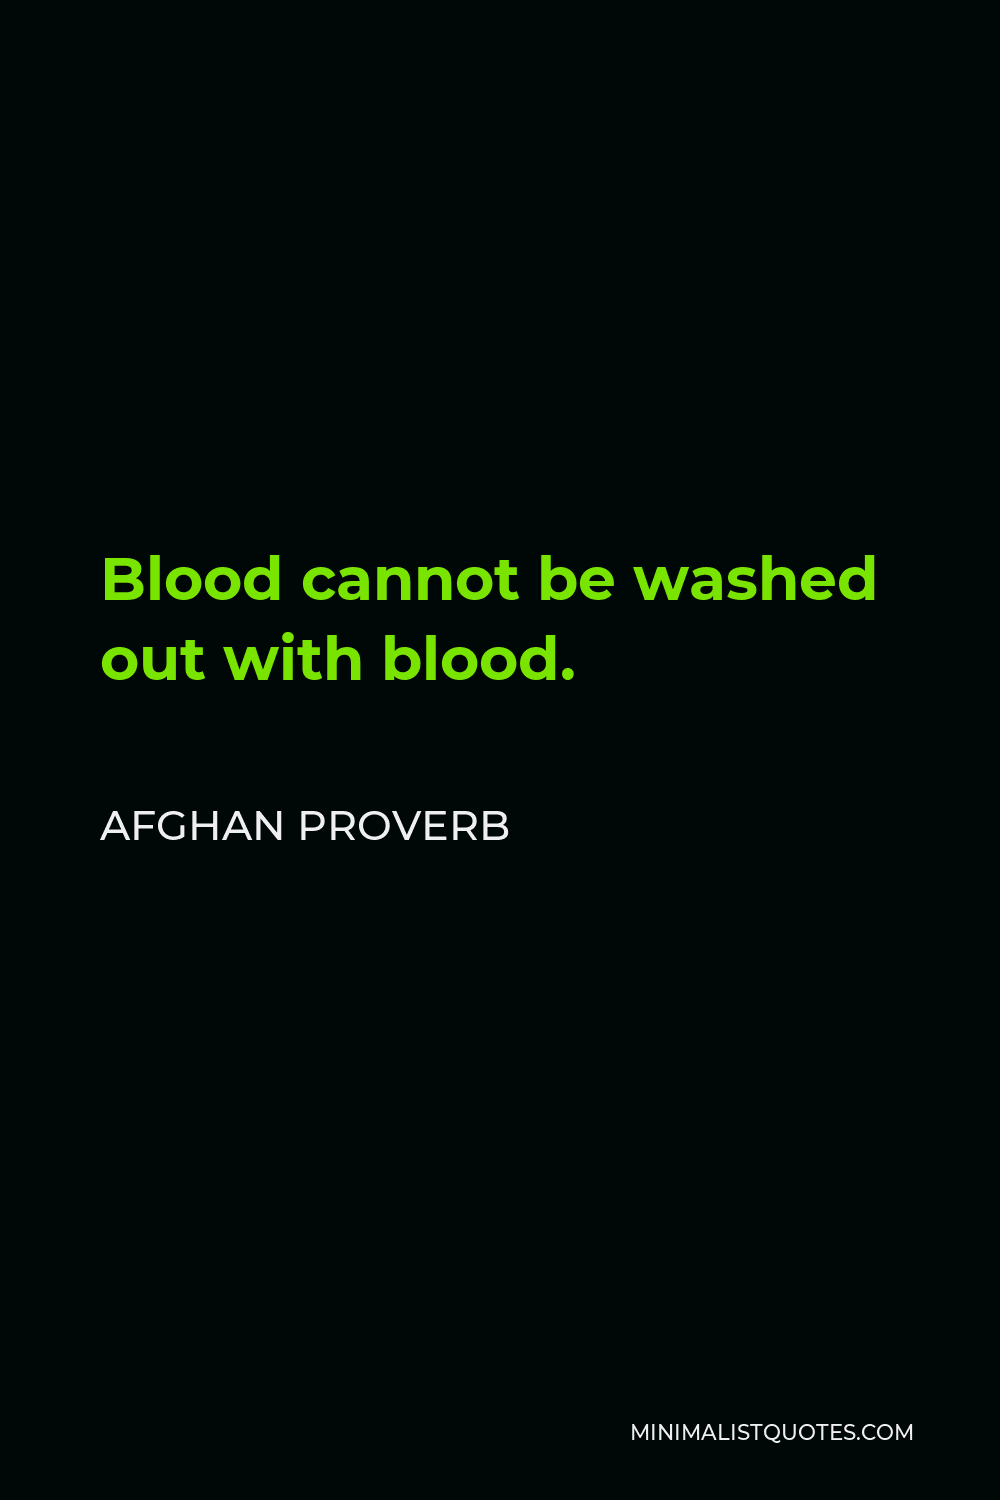 Afghan Proverb Quote - Blood cannot be washed out with blood.